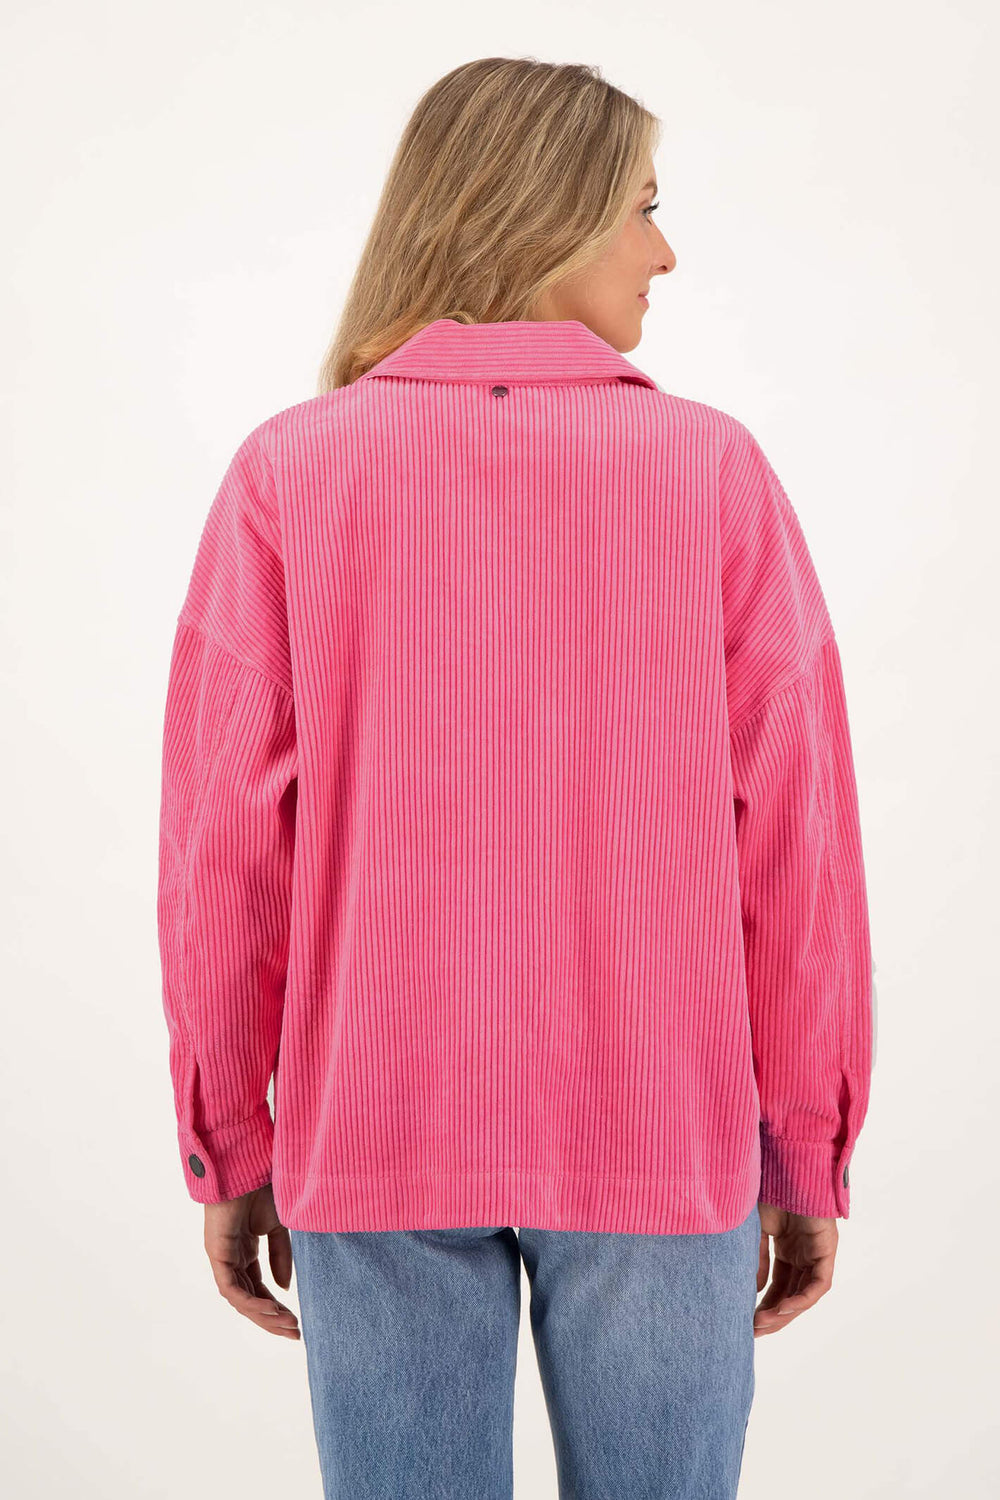 Just White You Y2067 Fuchsia Pink Corduroy Jacket - Experience Boutique